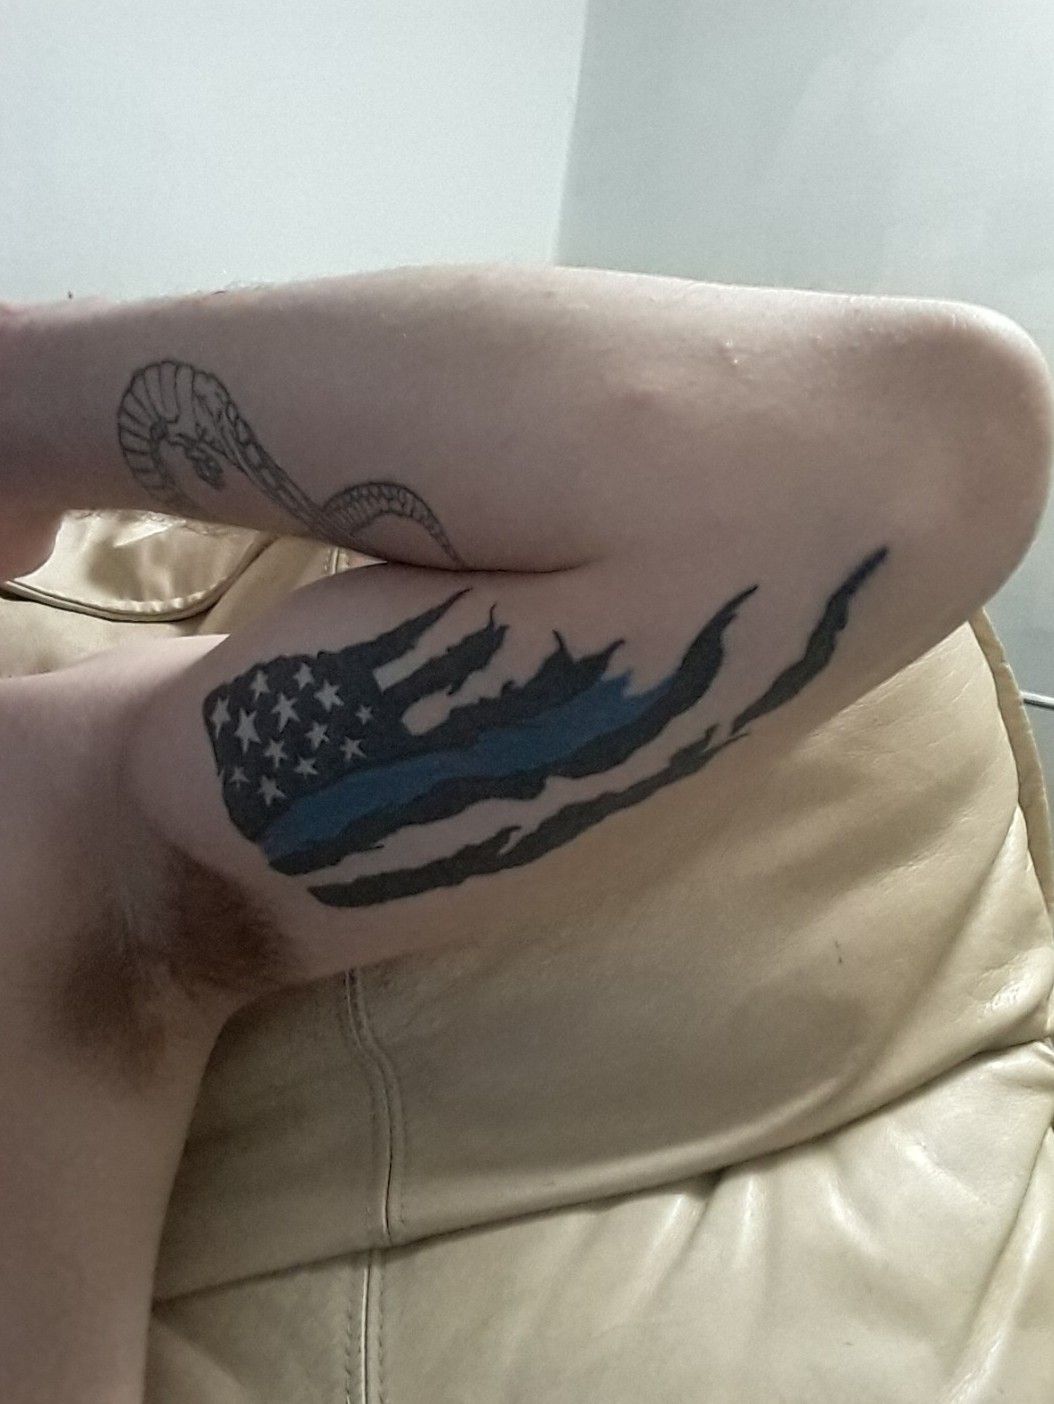 bluelivesmatter in Tattoos  Search in 13M Tattoos Now  Tattoodo